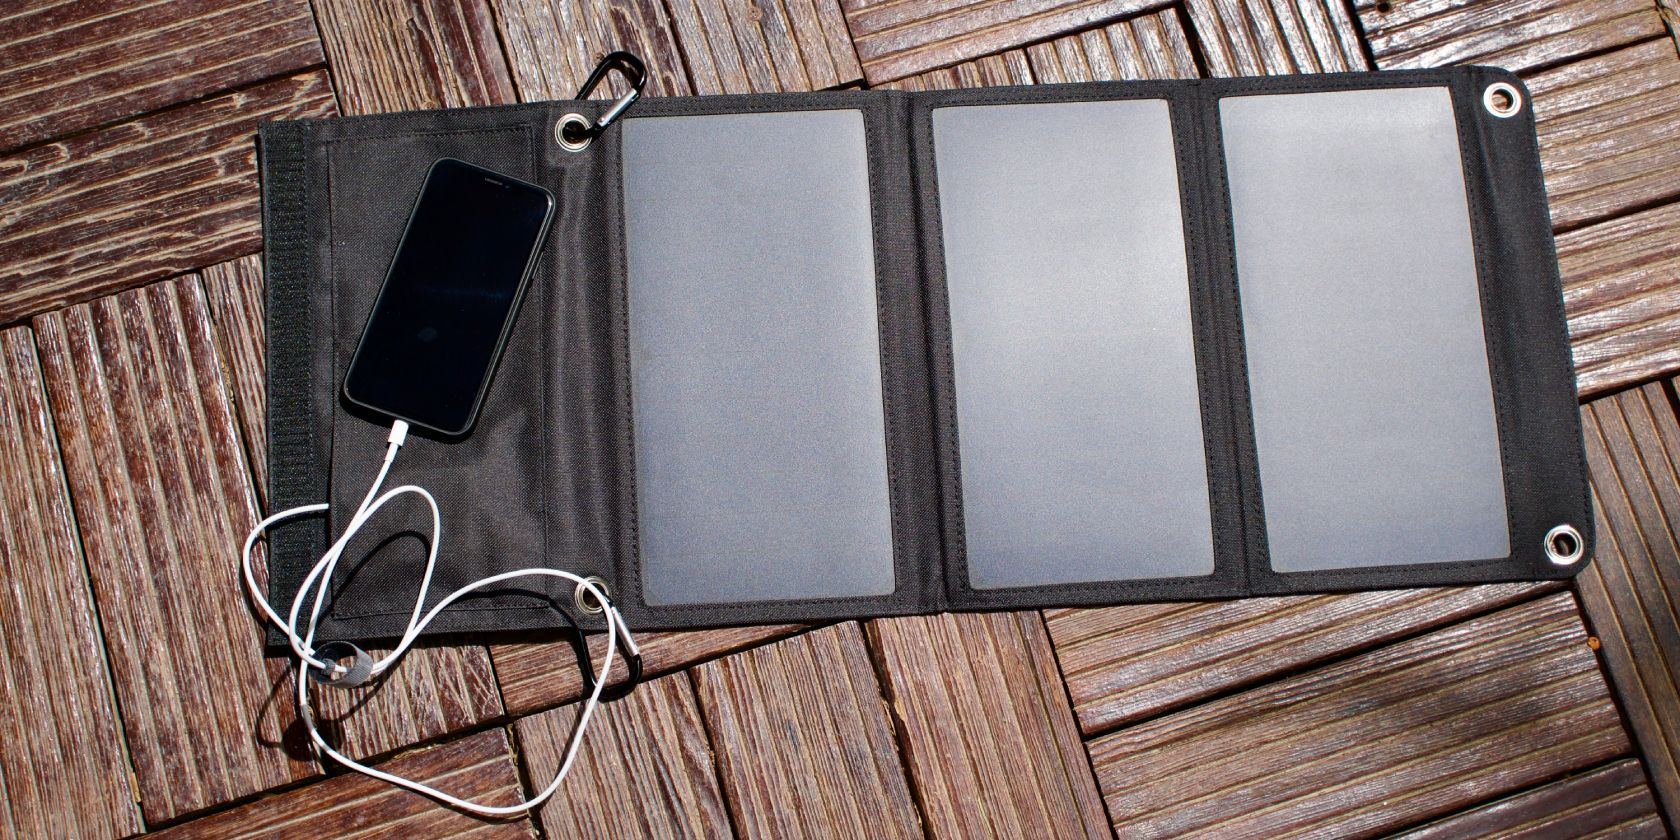 Smartphone resting on solar charger